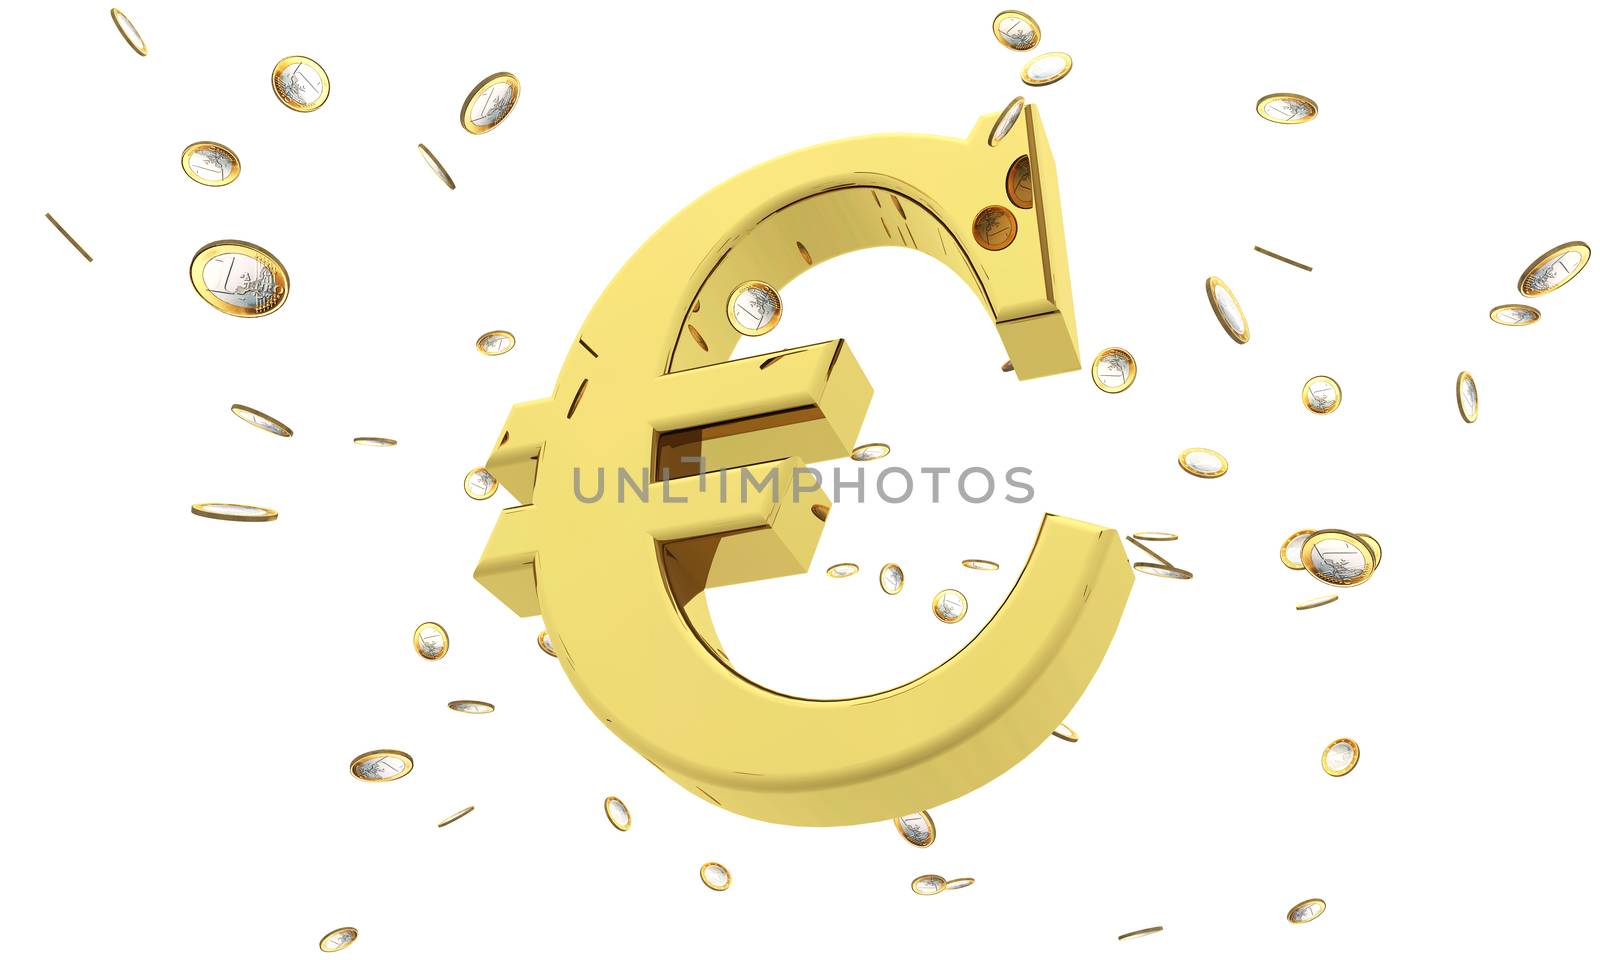 Rain euros in 3d isolated on white with clipping path